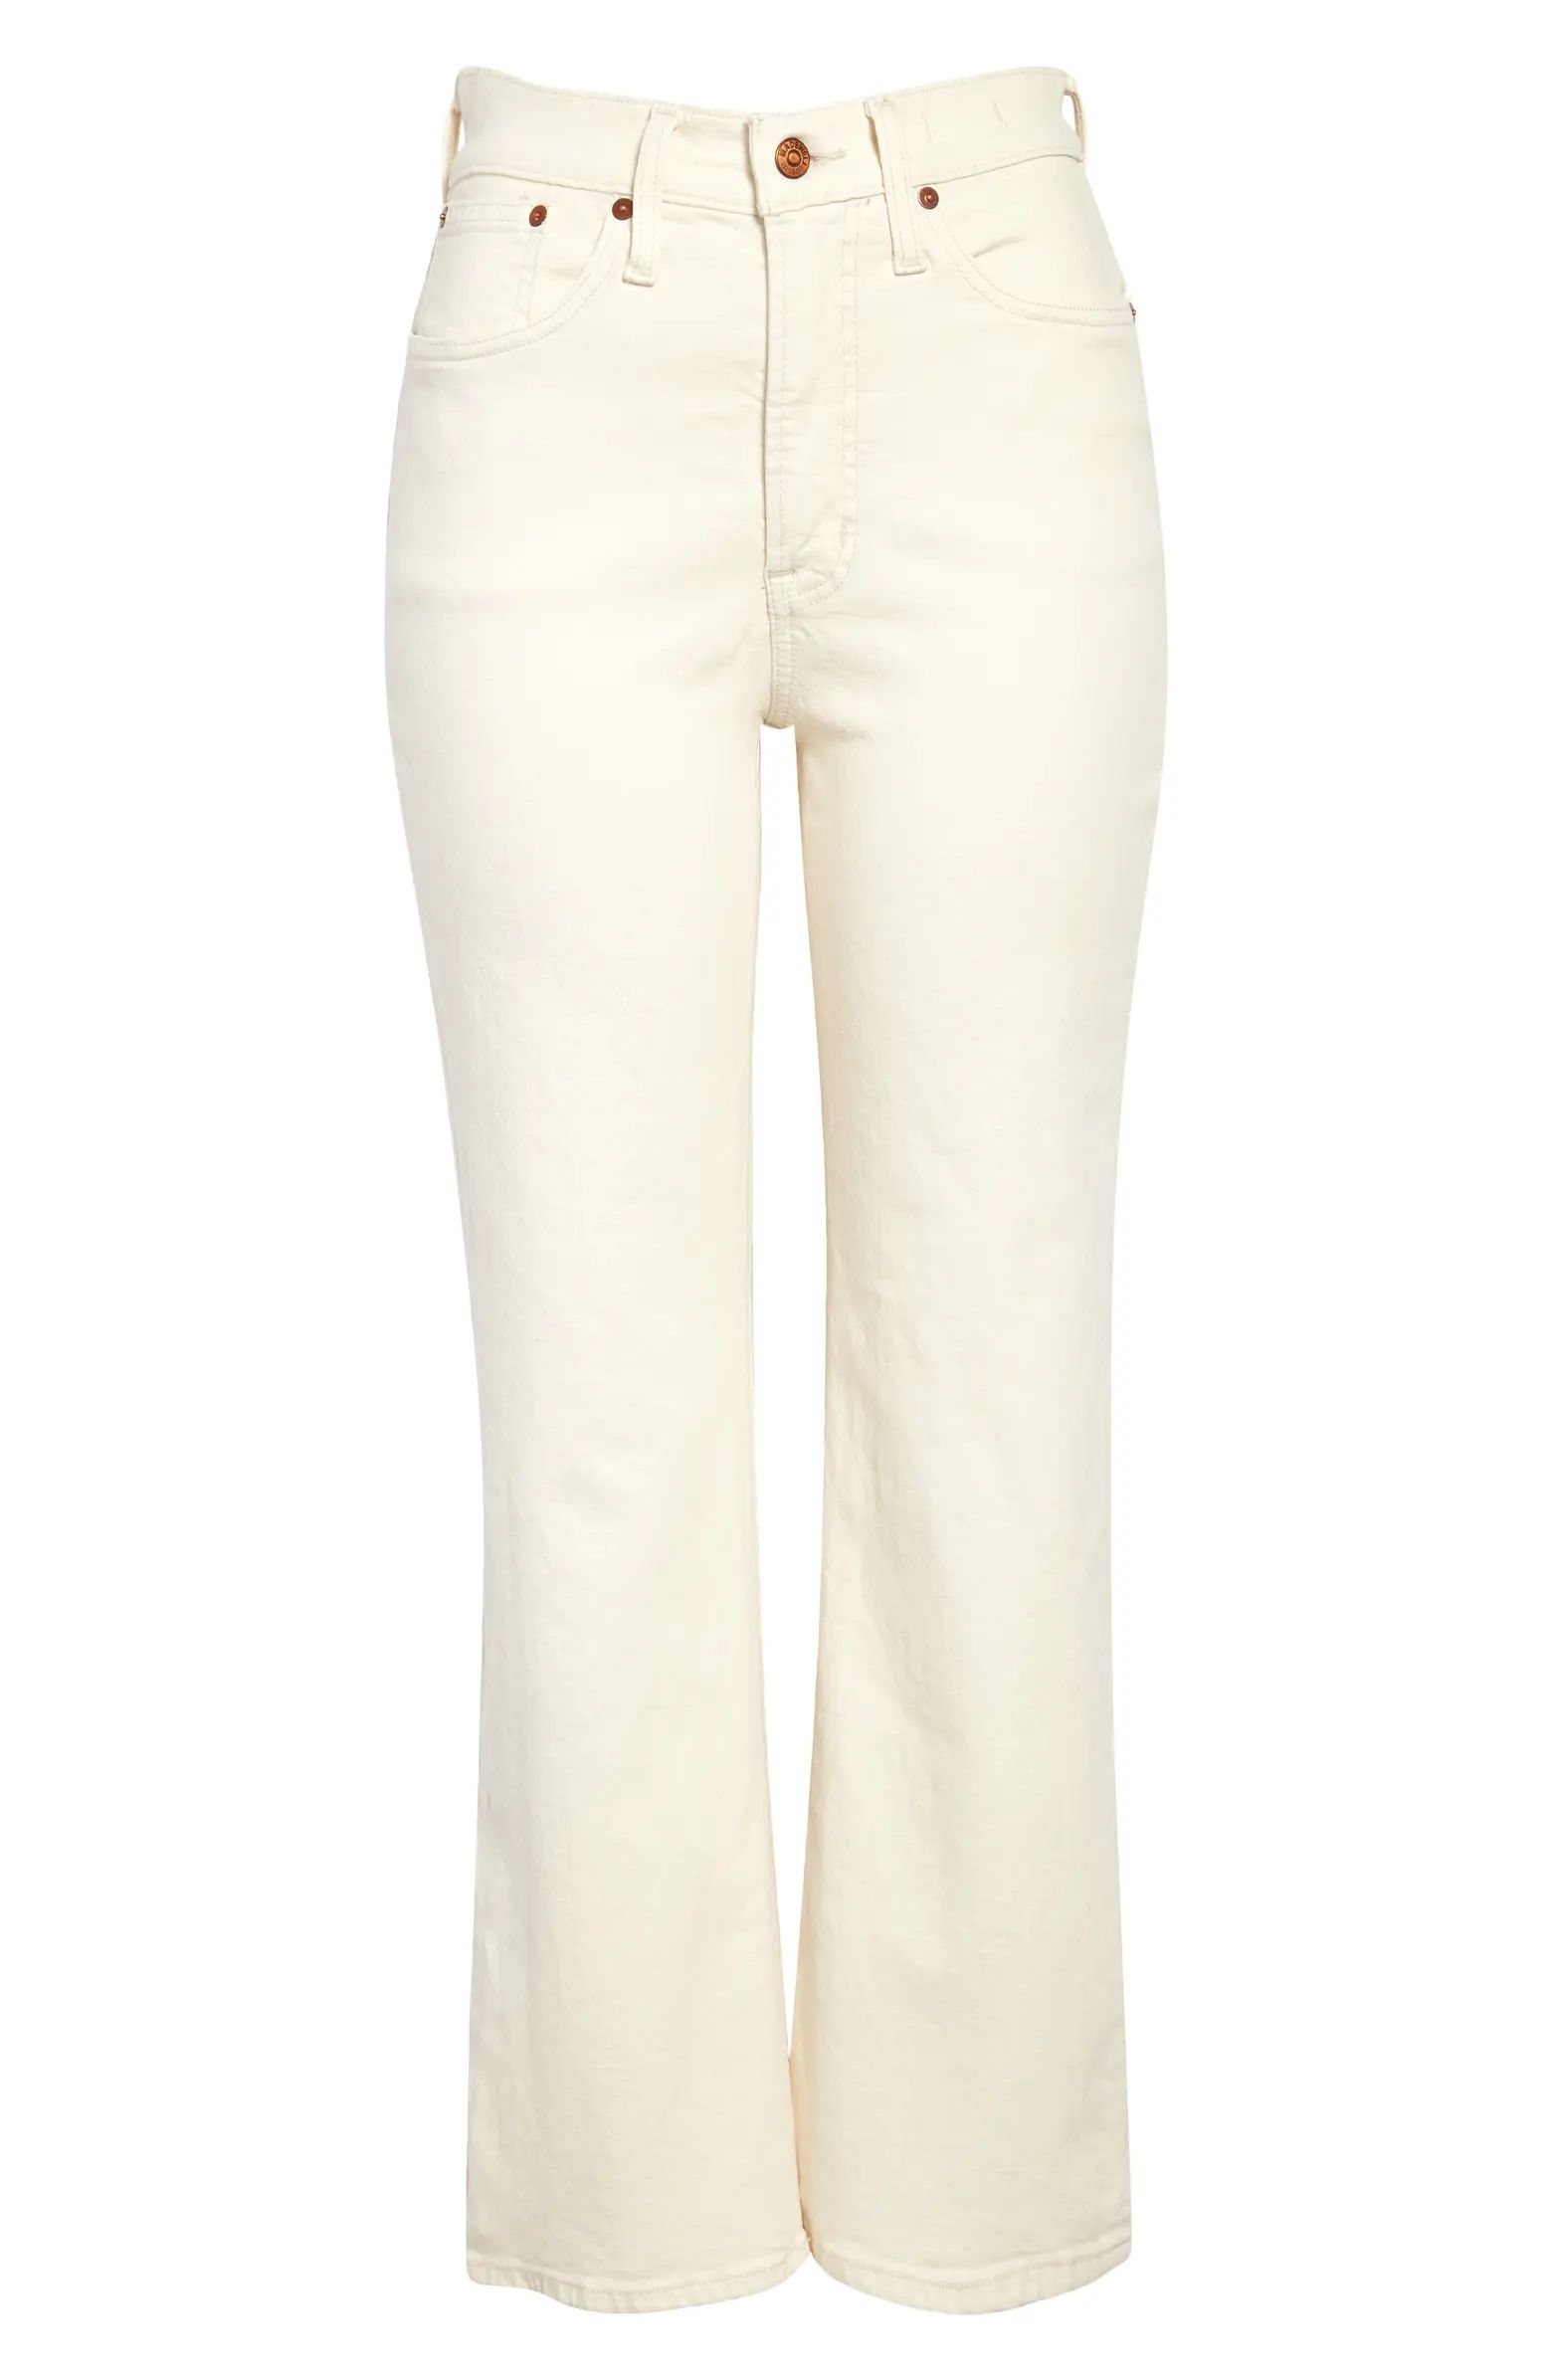 Madewell The Perfect Vintage Flare Crop Jeans | Nordstrom | Nordstrom